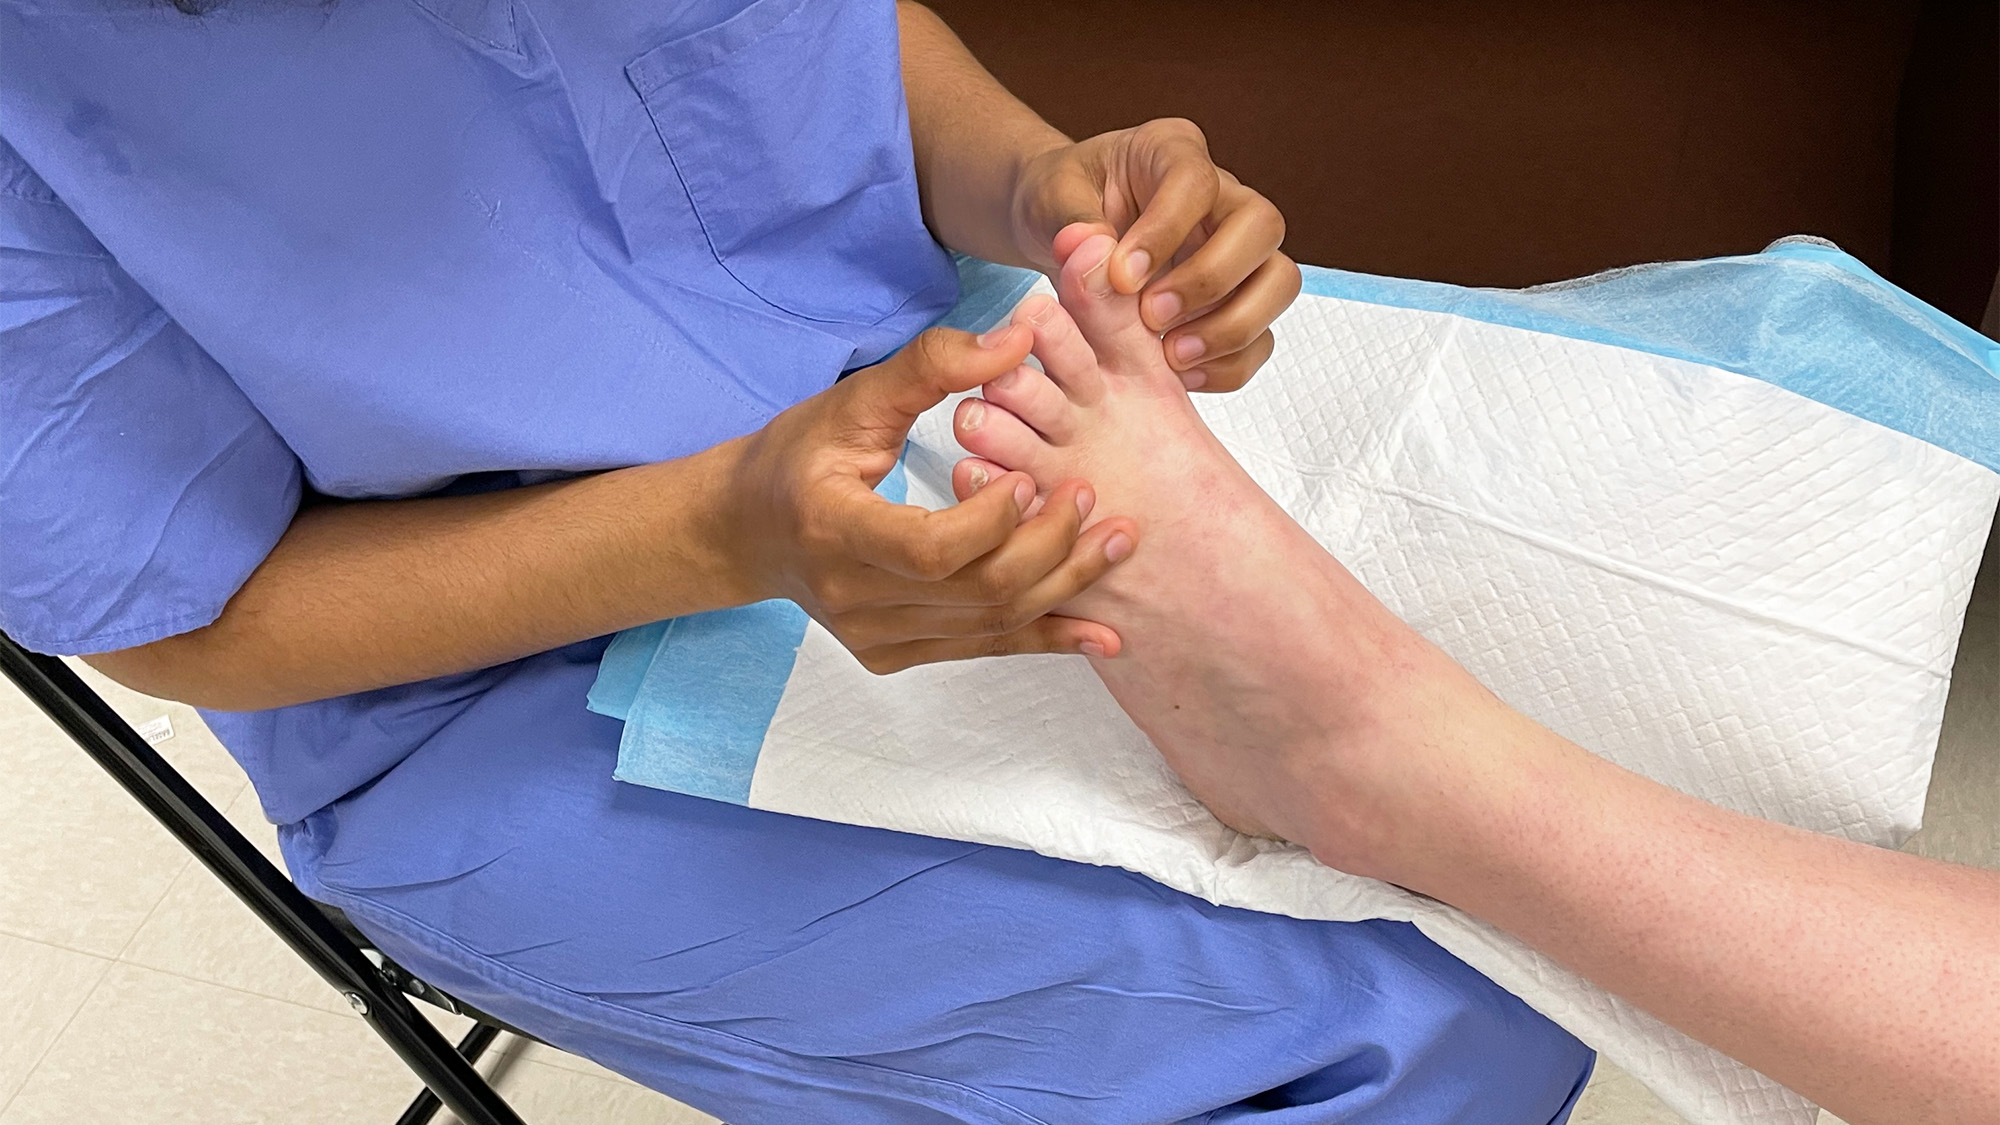 A medical student holds a patient's foot during an exam